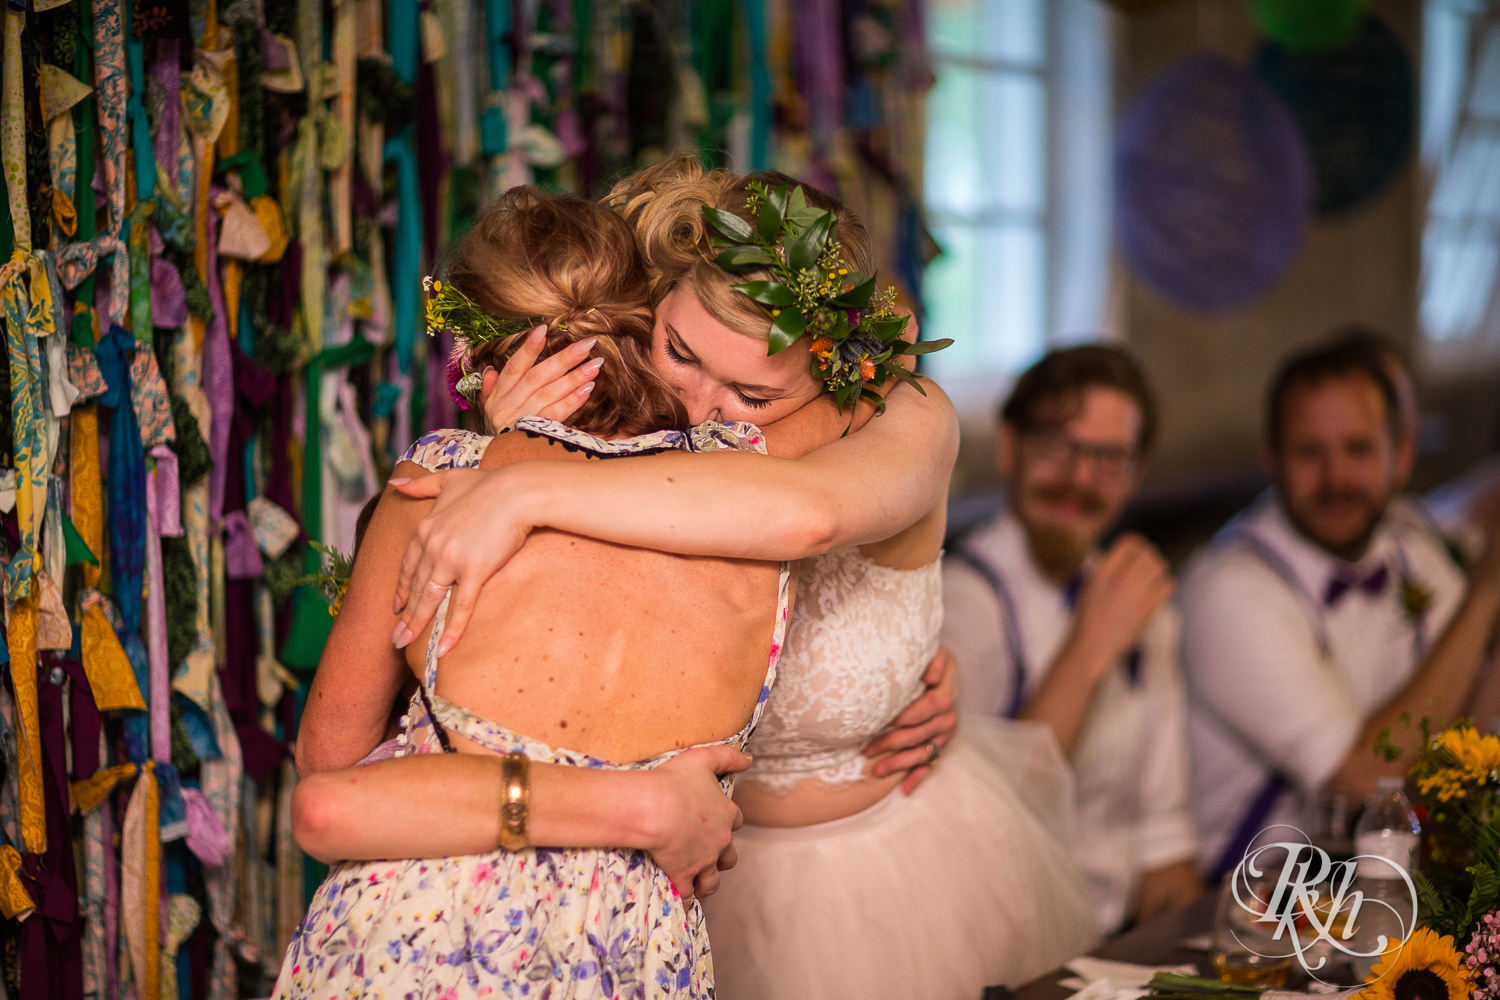 Mom and bride hug during wedding reception at Coops Event Barn in Dodge Center, Minnesota.